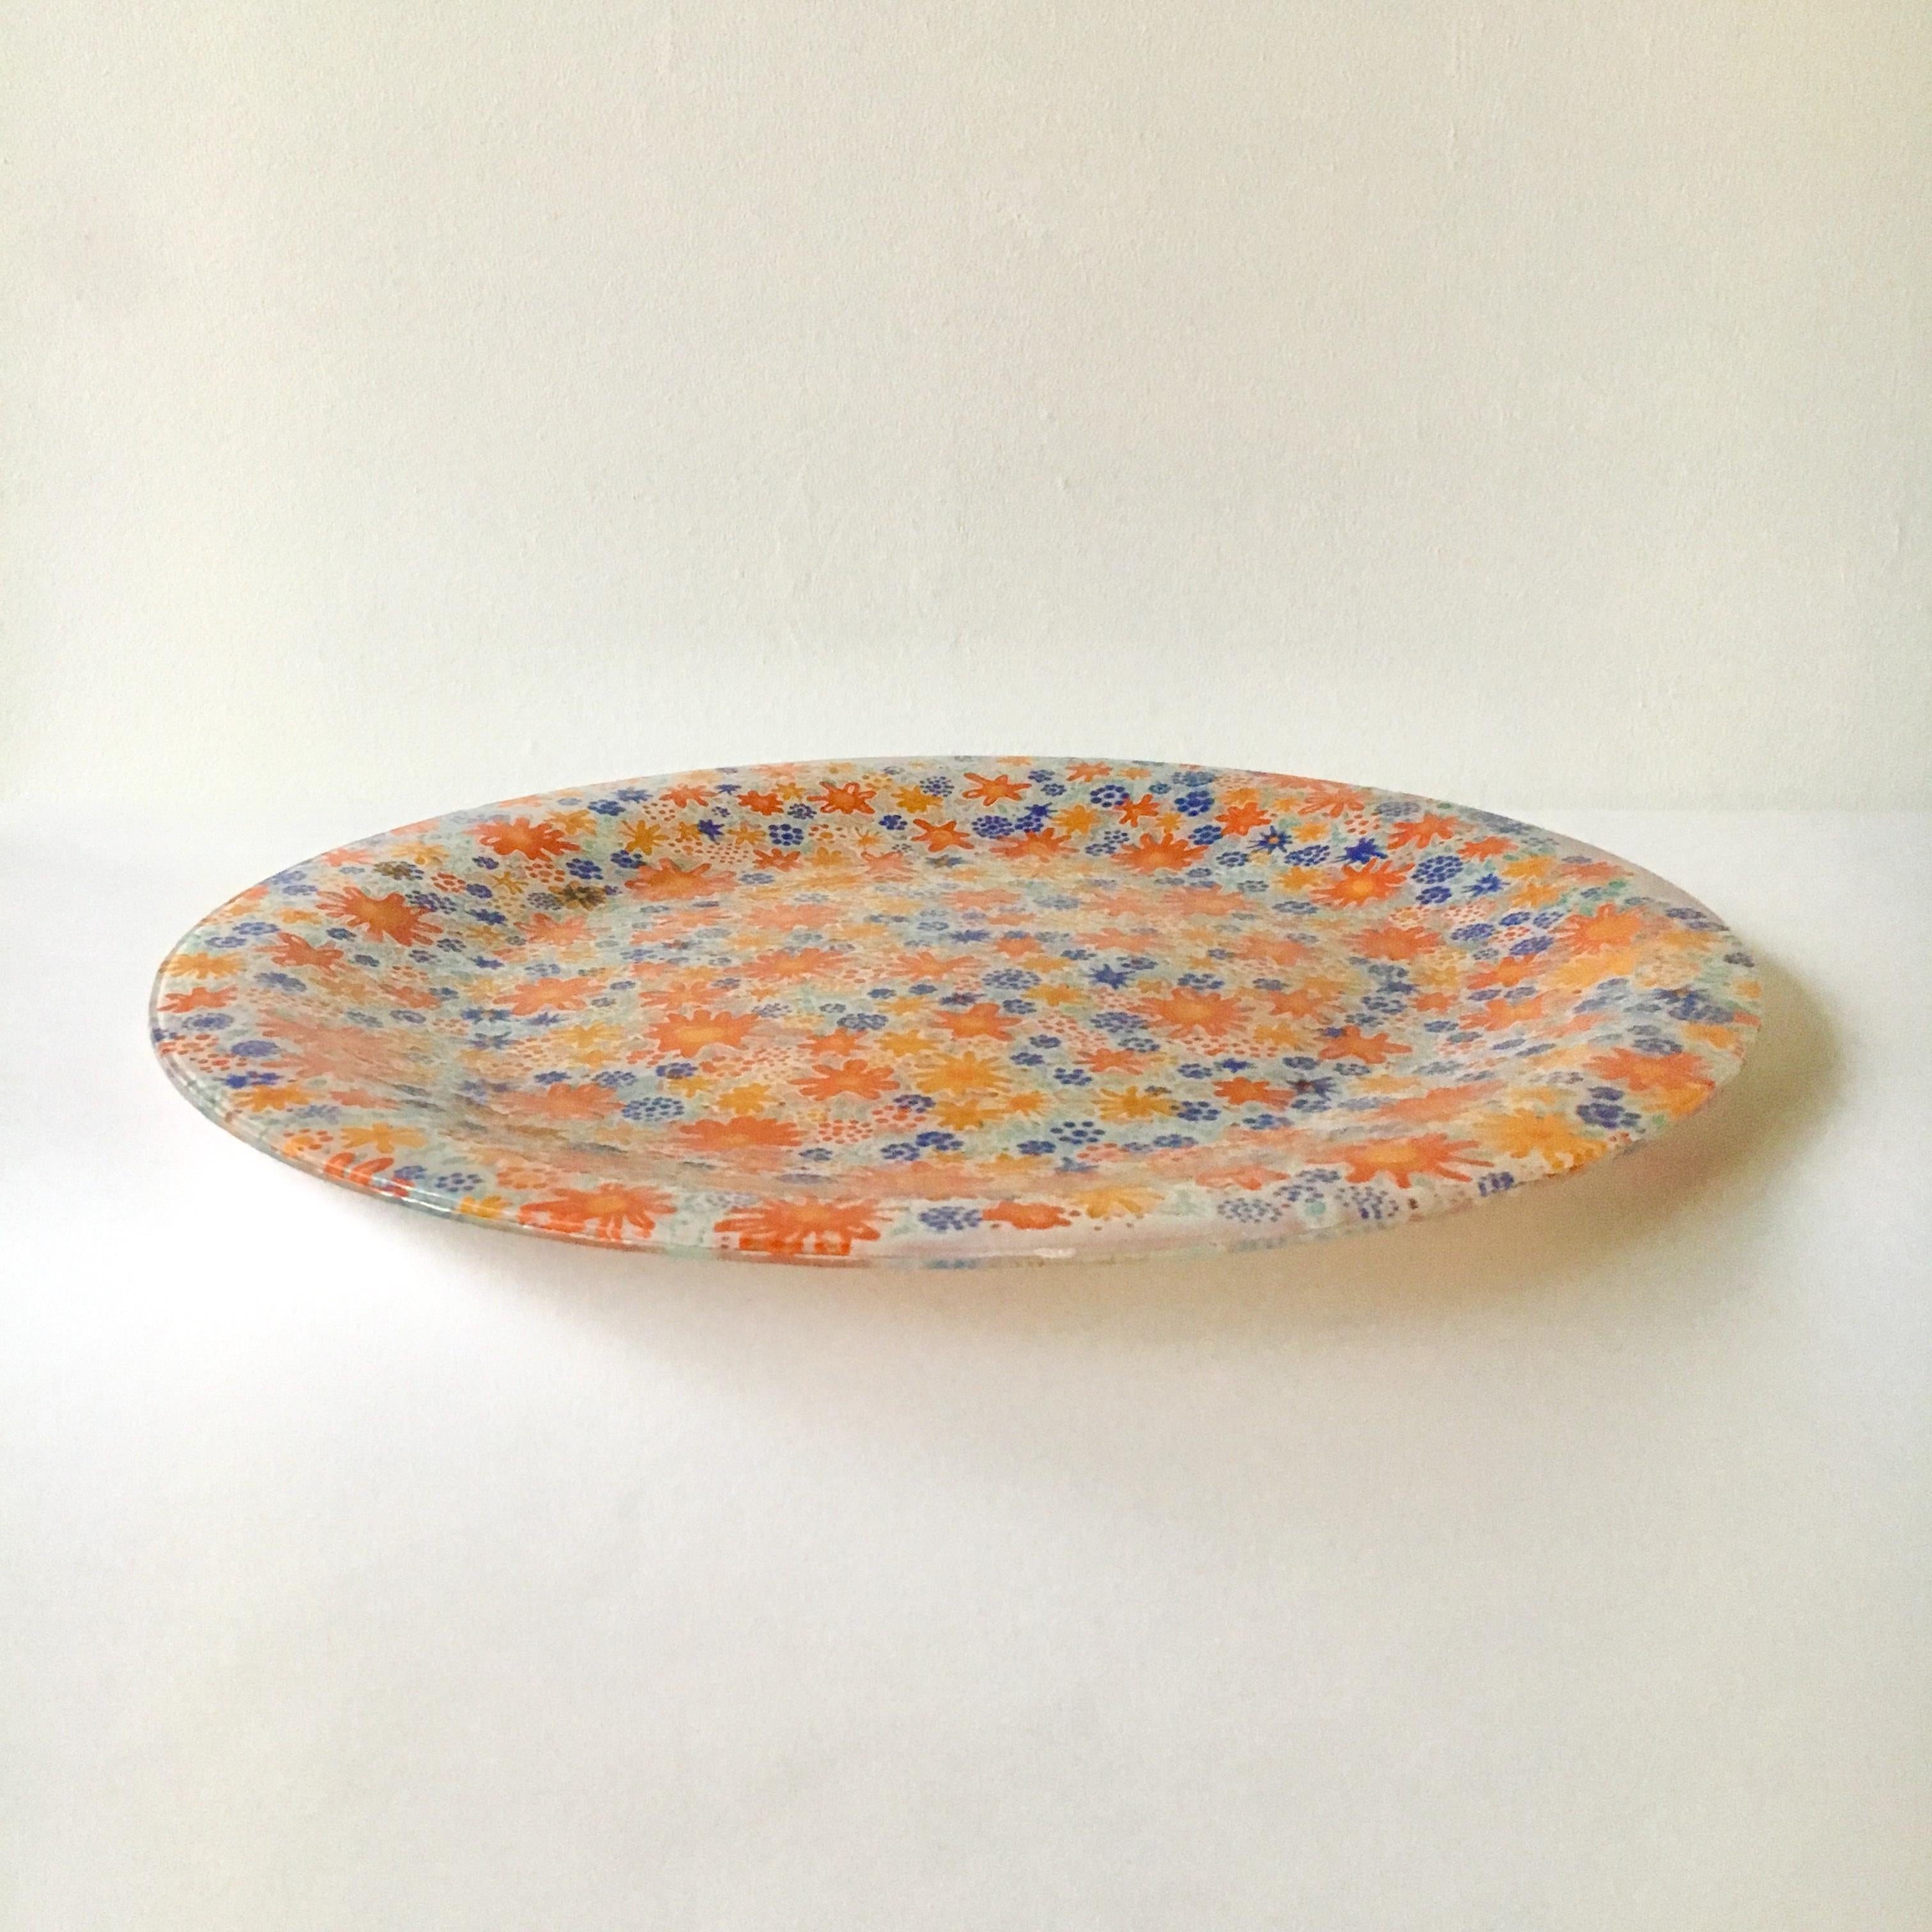 Arts and Crafts Large Country Garden Patterned Fused Glass Plate by Higgins 